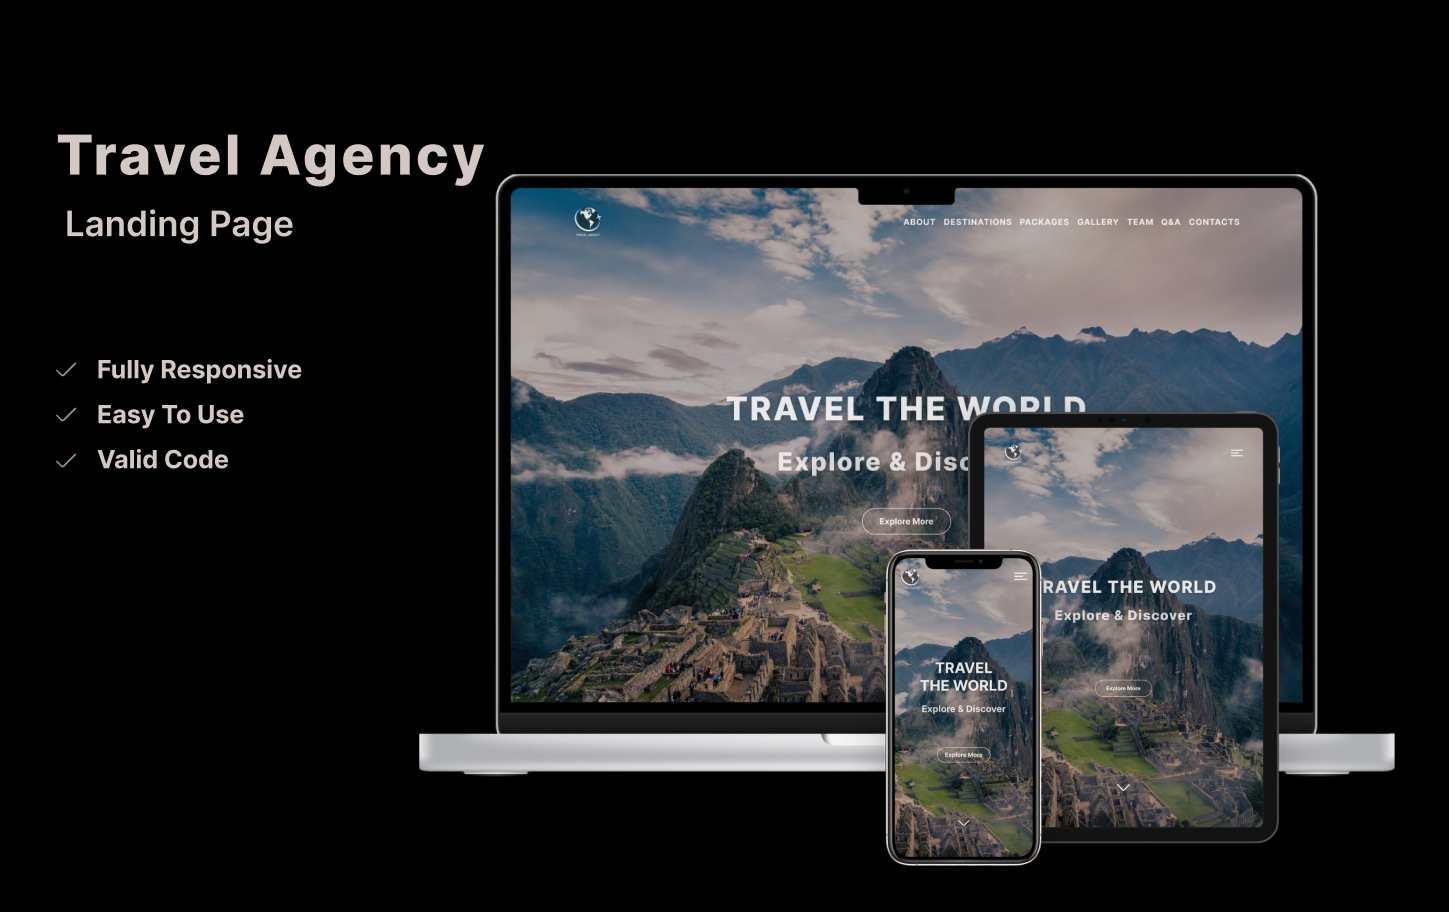 Travel Agency - Landing Page Template